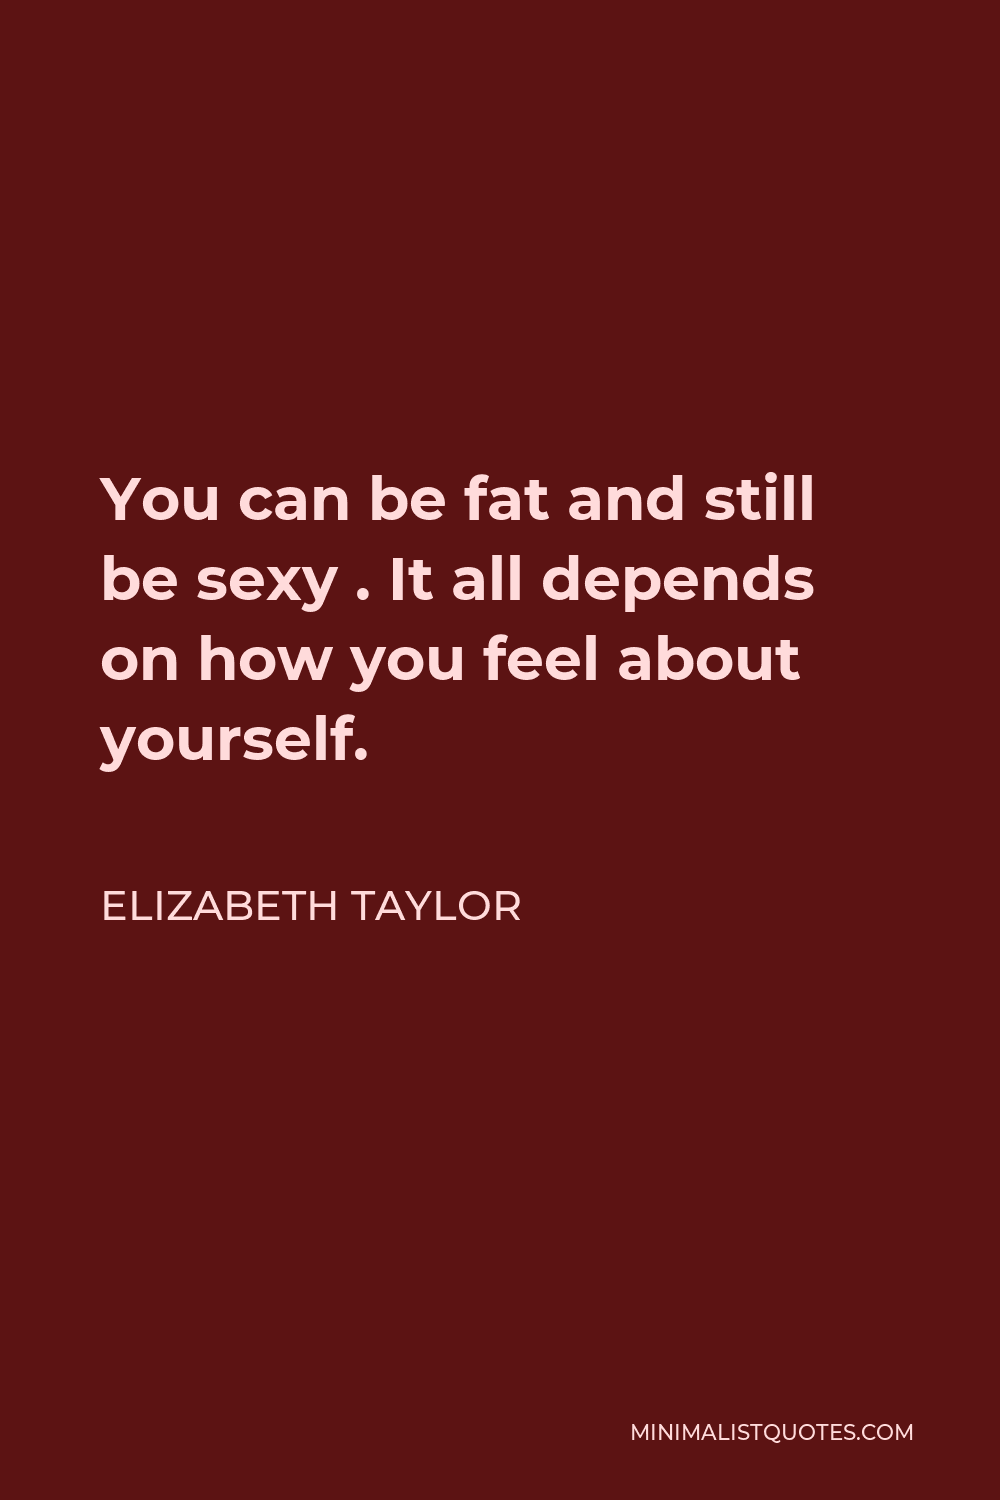 Elizabeth Taylor Quote - You can be fat and still be sexy . It all depends on how you feel about yourself.